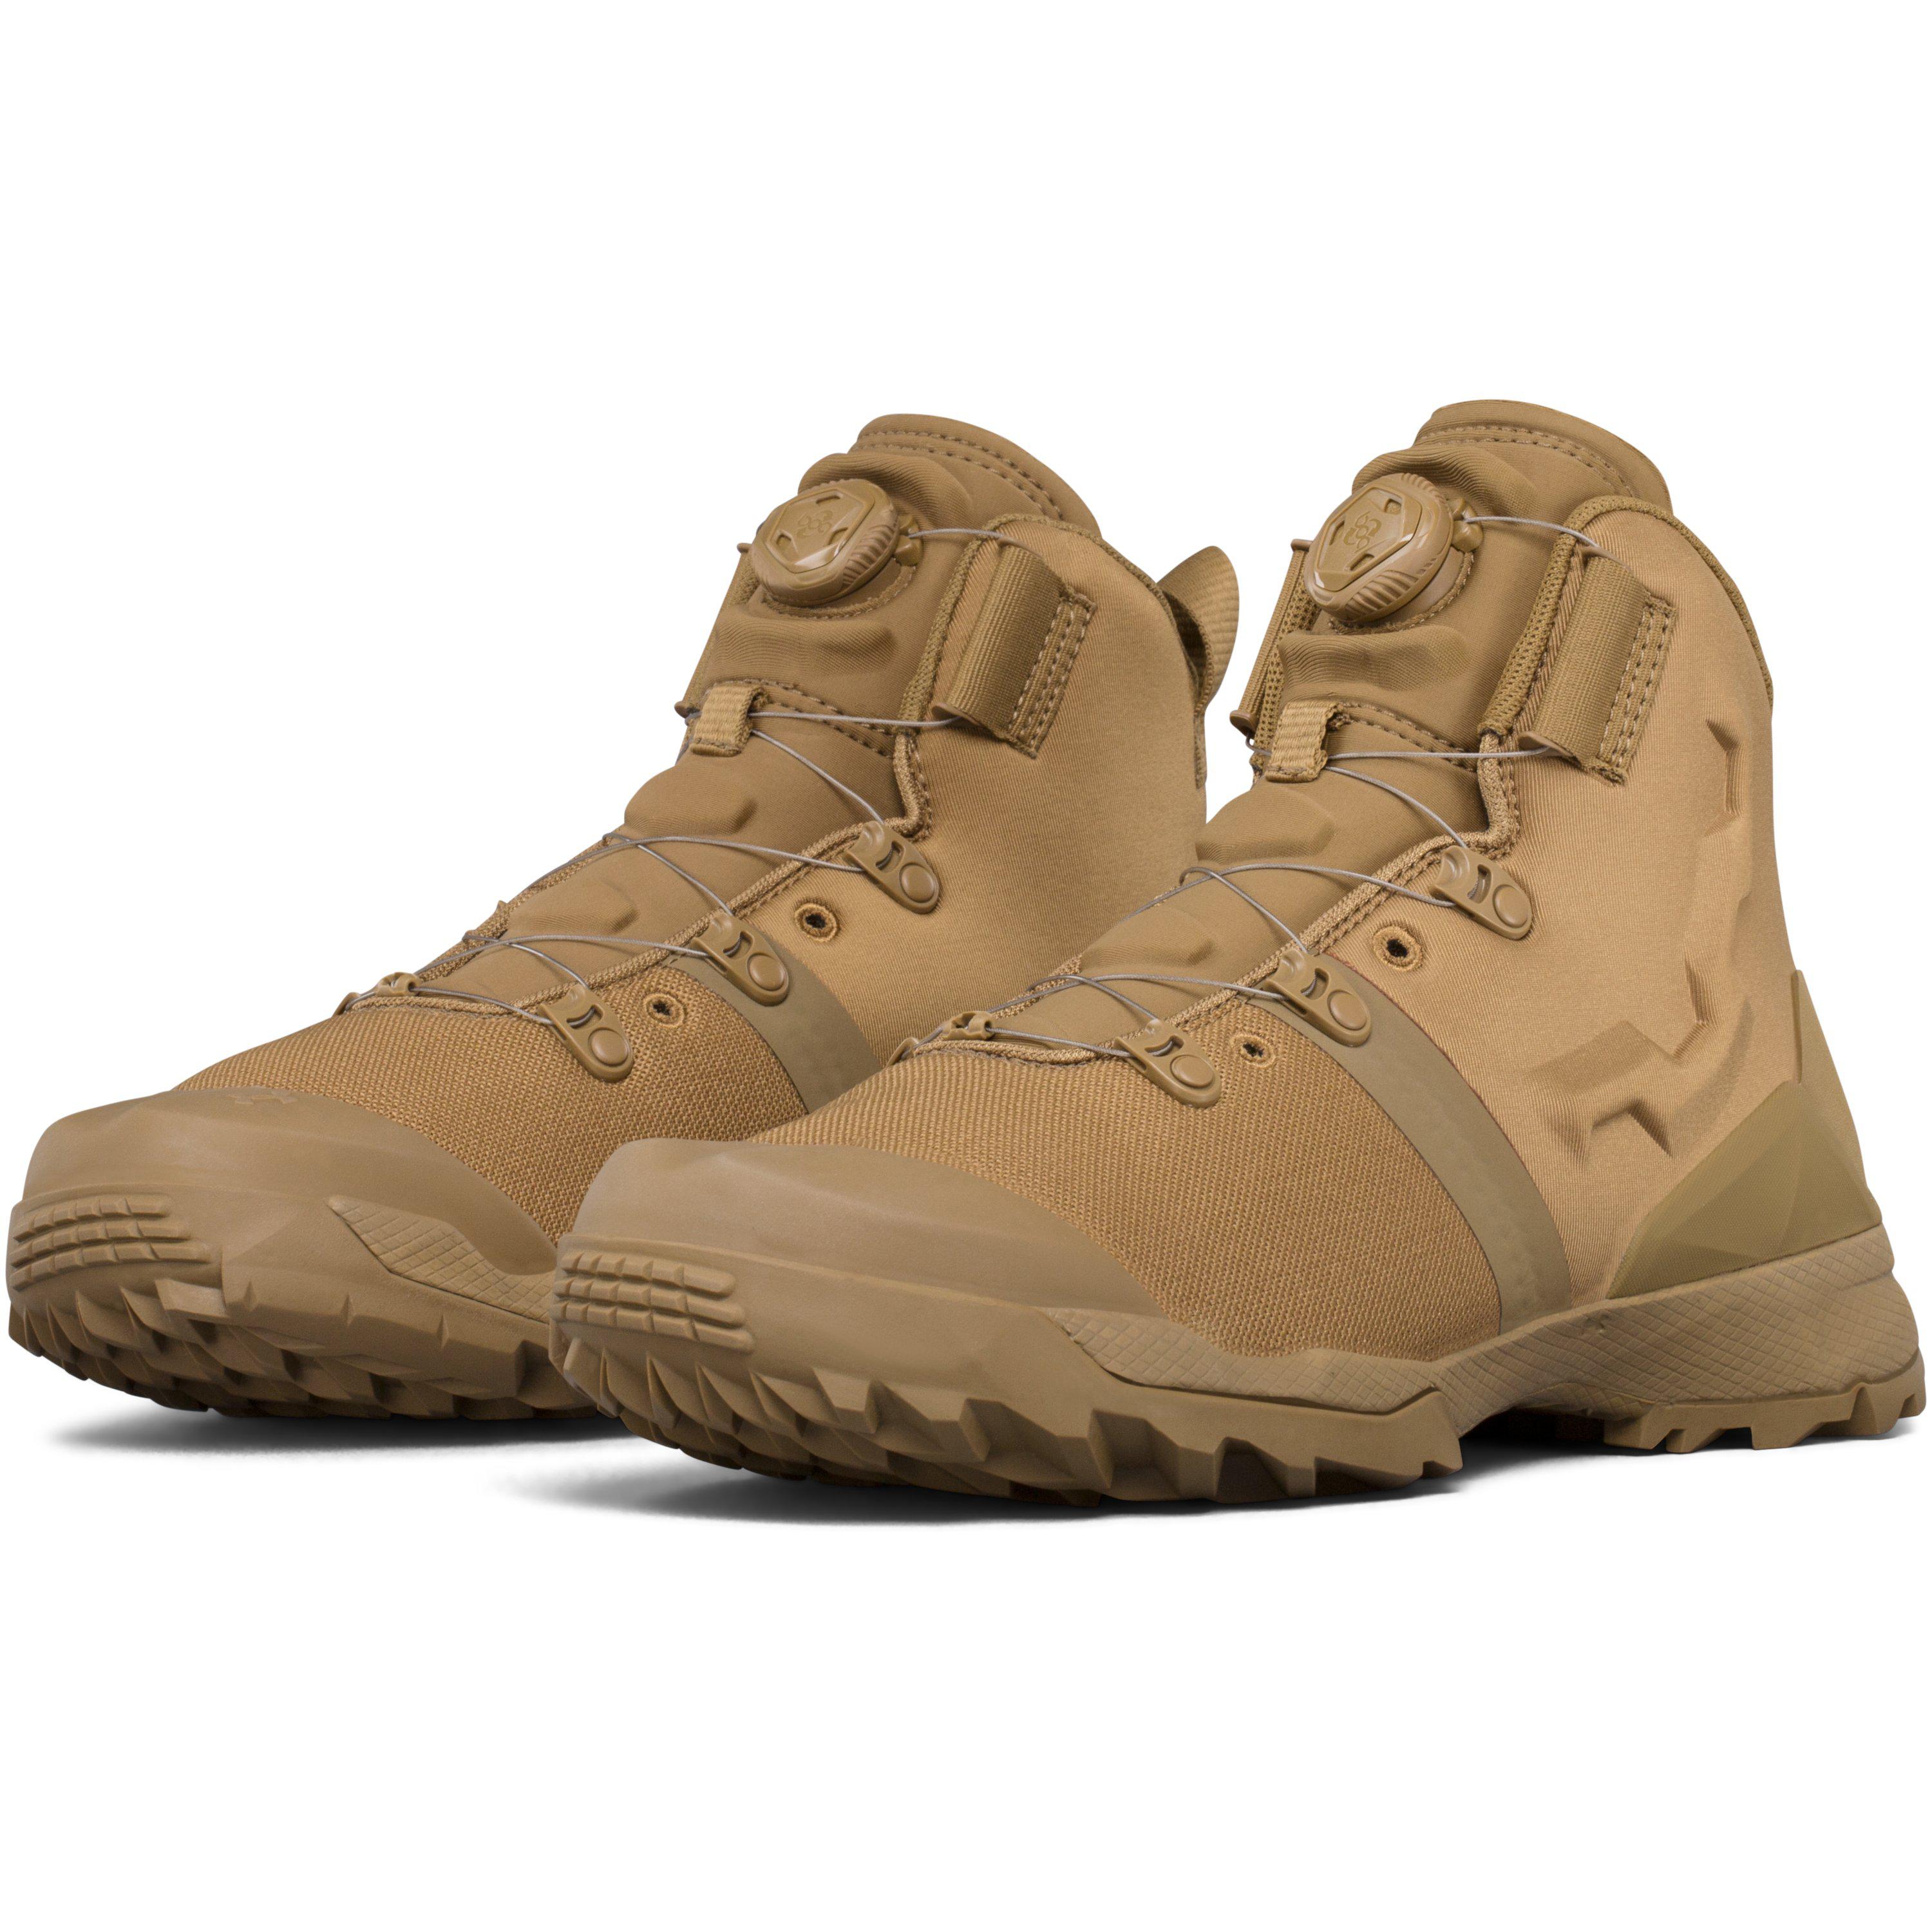 Under Armour Rubber Men's Ua Infil Tactical Boots in Brown for Men - Lyst